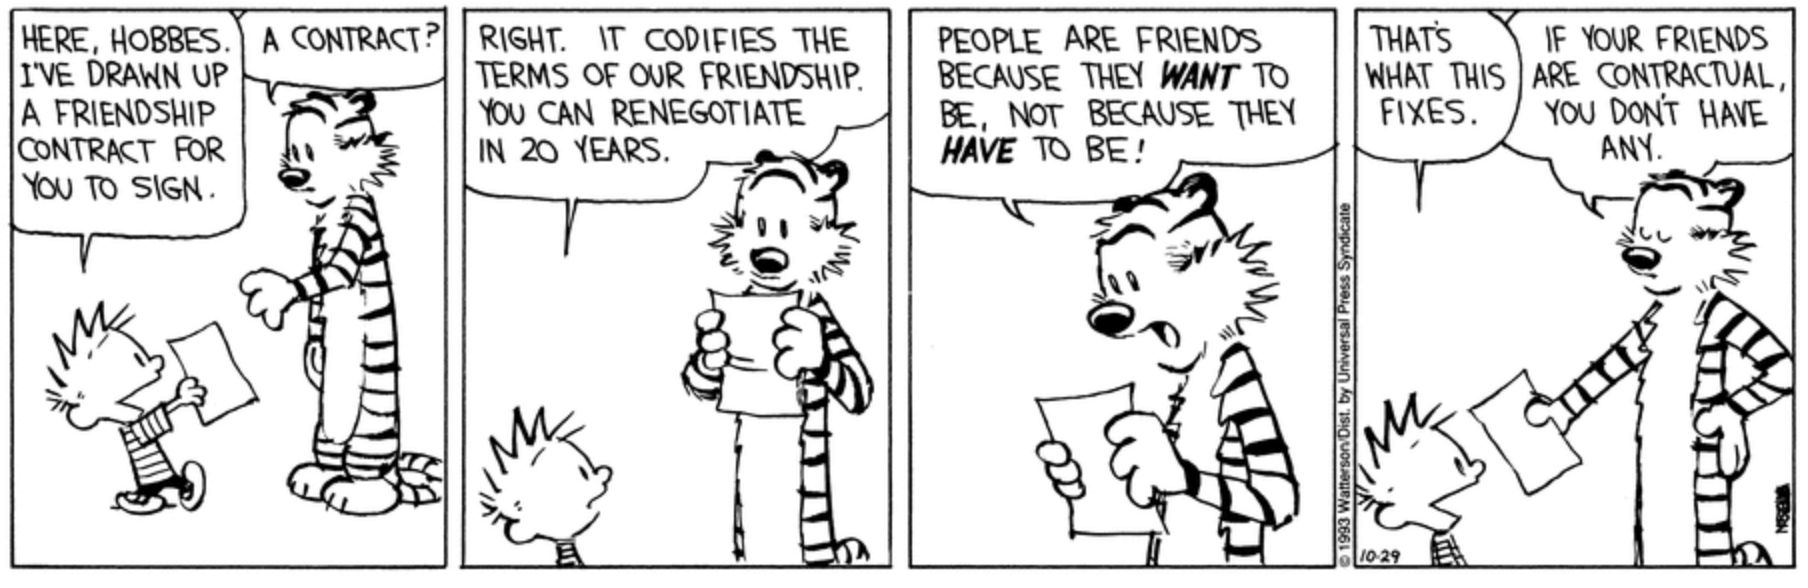 Contractual friends in Calvin and Hobbes